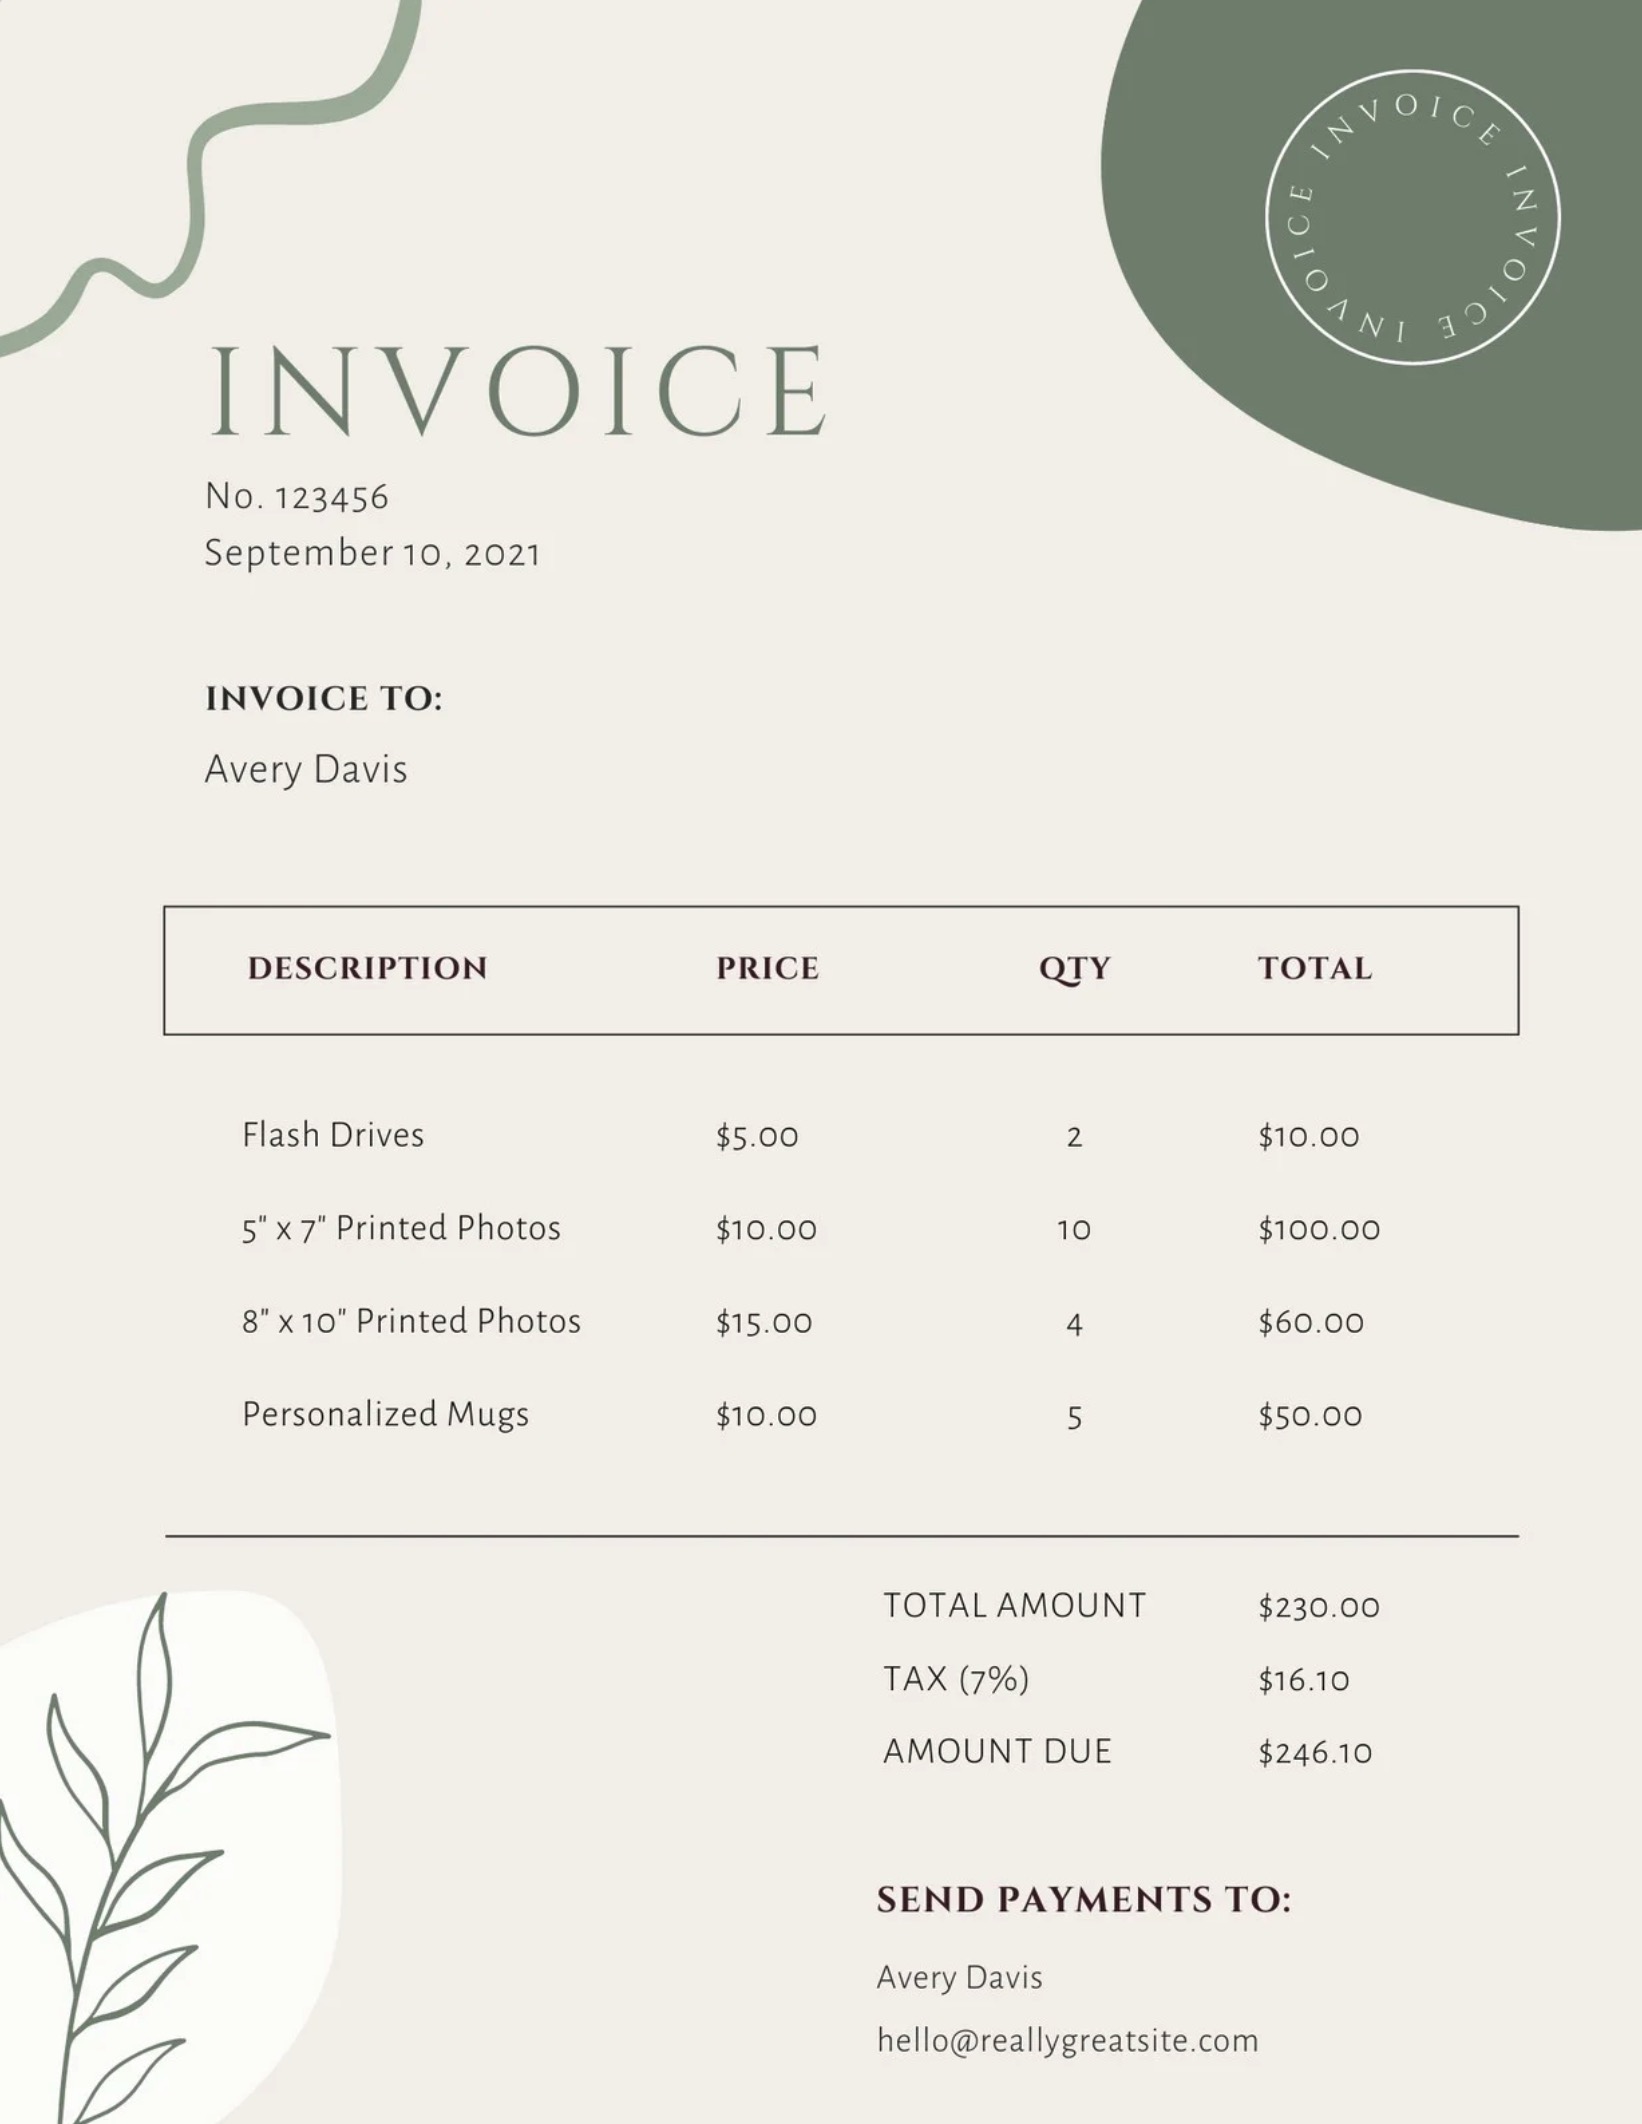 A green and white invoice template with a leaf design.